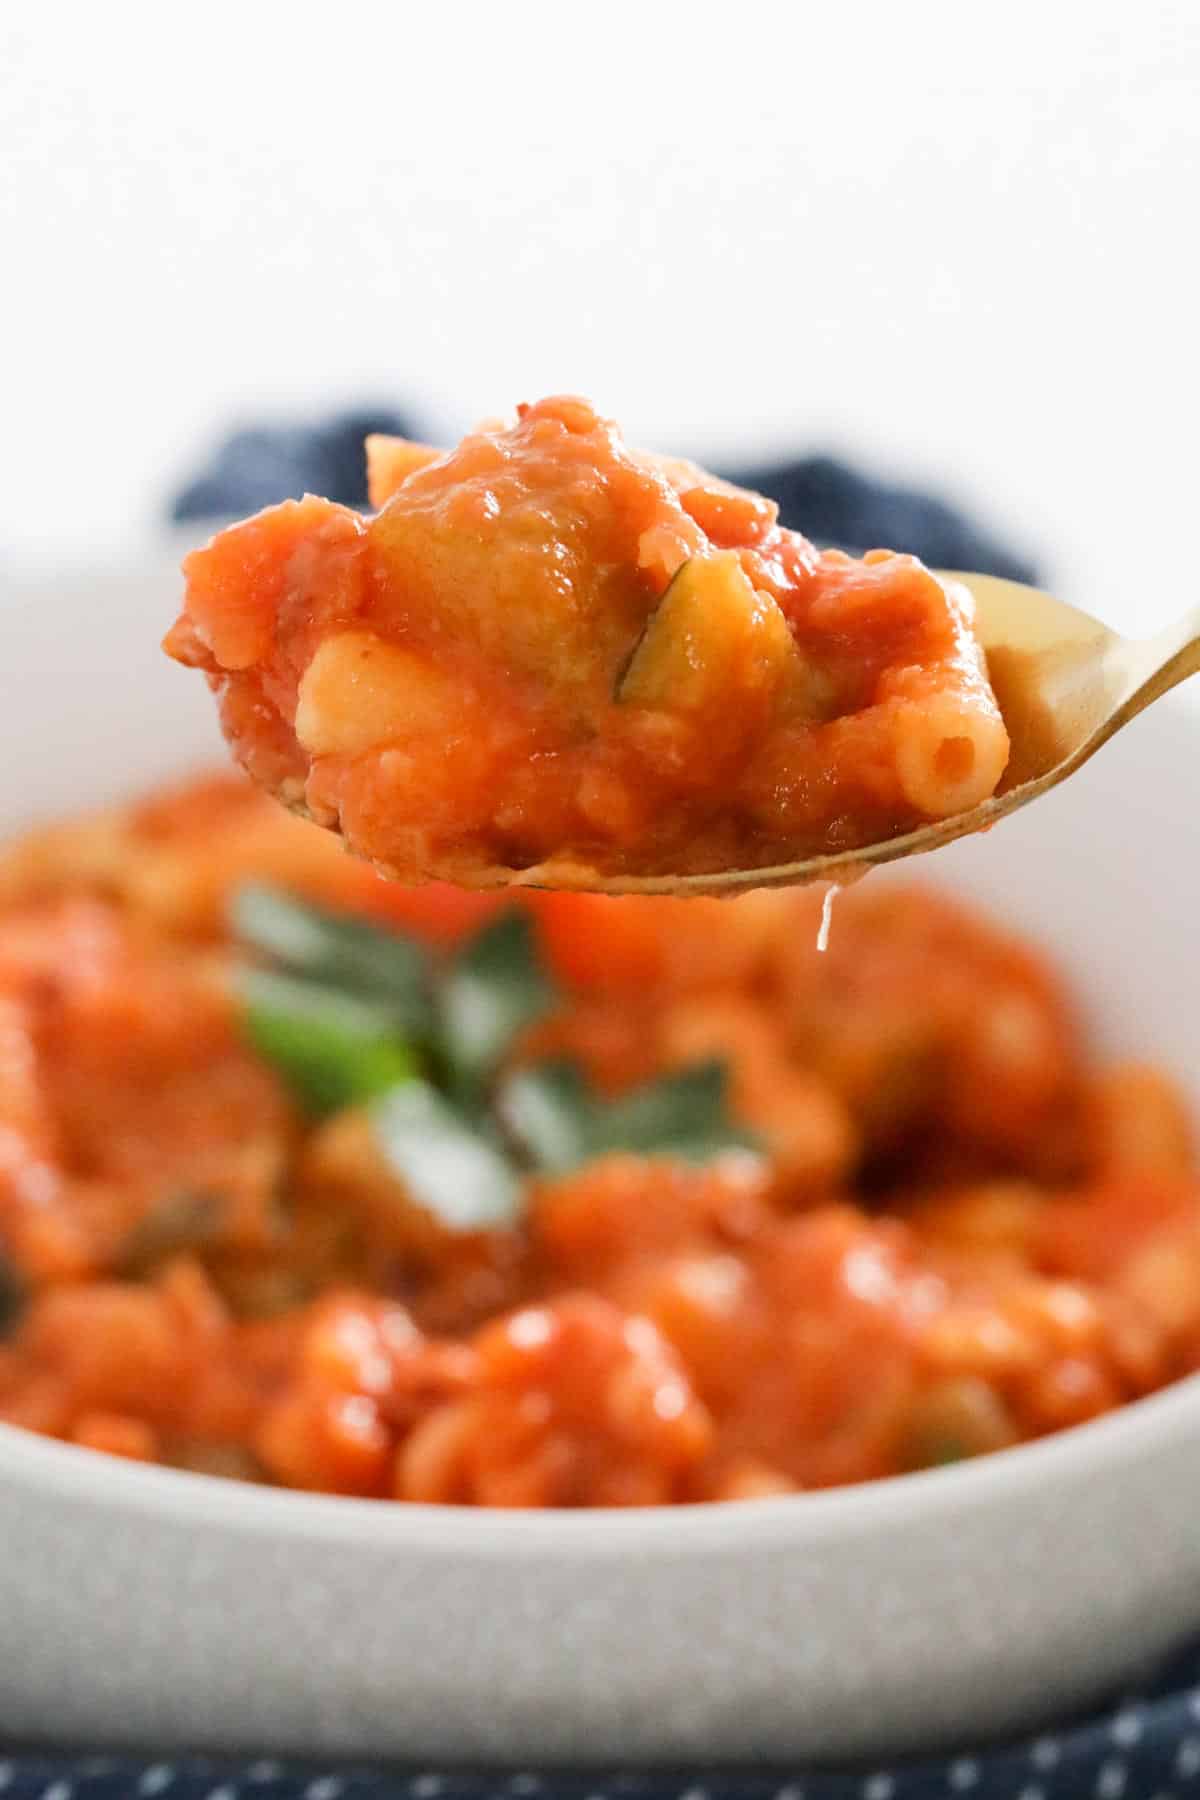 A close up of a spoonful of tomato and vegetable soup.